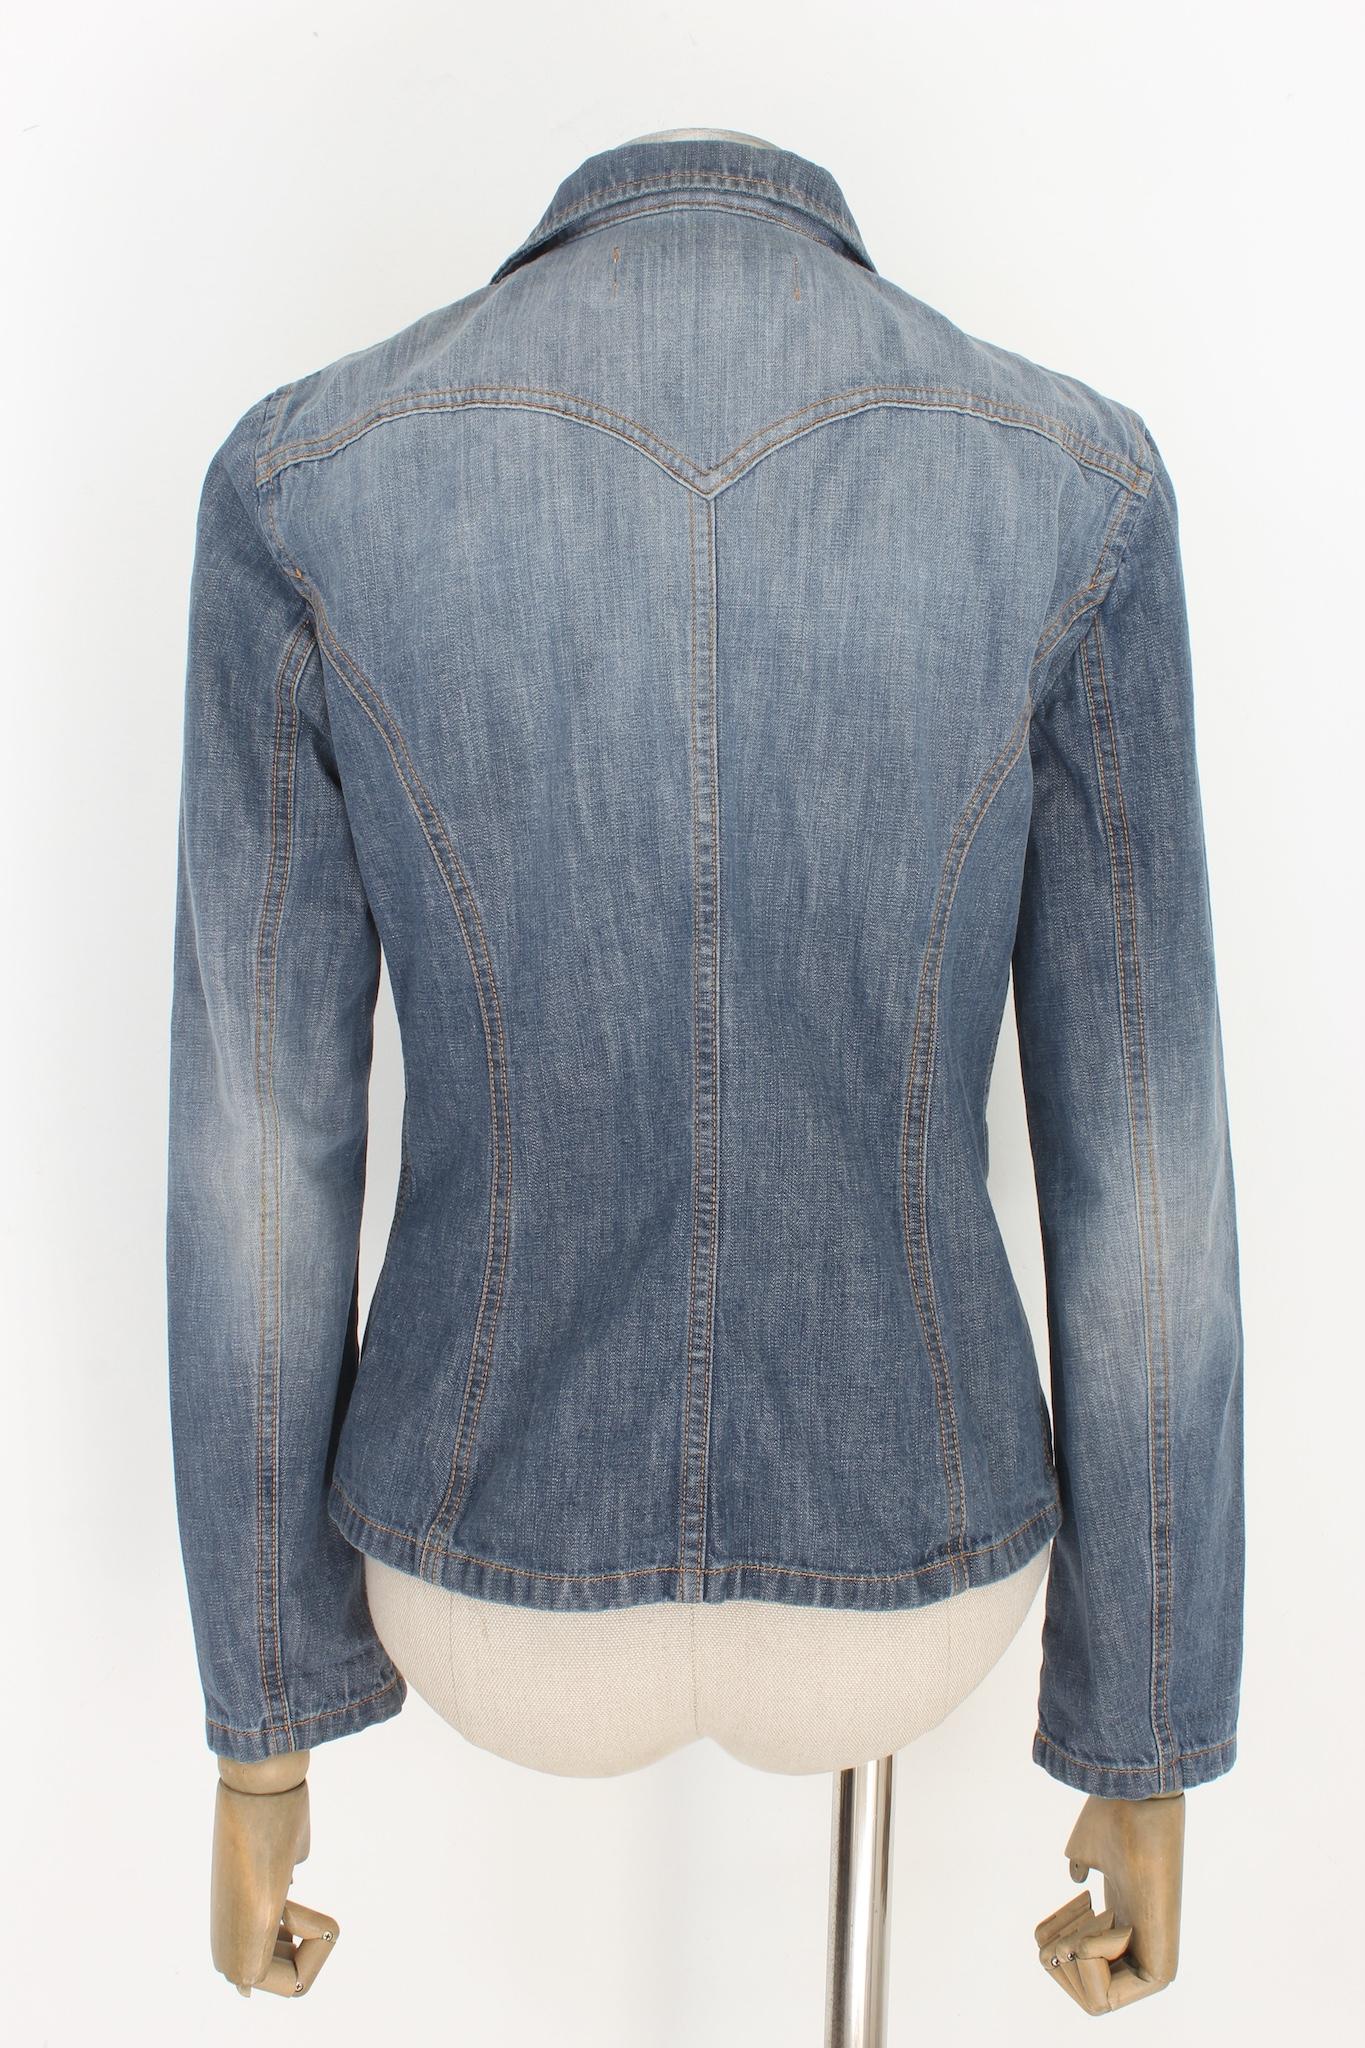 Moschino vintage 90s denim jacket. Casual, fitted blazer, 100% cotton fabric. Made in Italy.

Size: 44 It 10 Us 12 Uk

Shoulder: 44 cm
Bust/Chest: 46 cm
Sleeve: 60 cm
Length: 60 cm